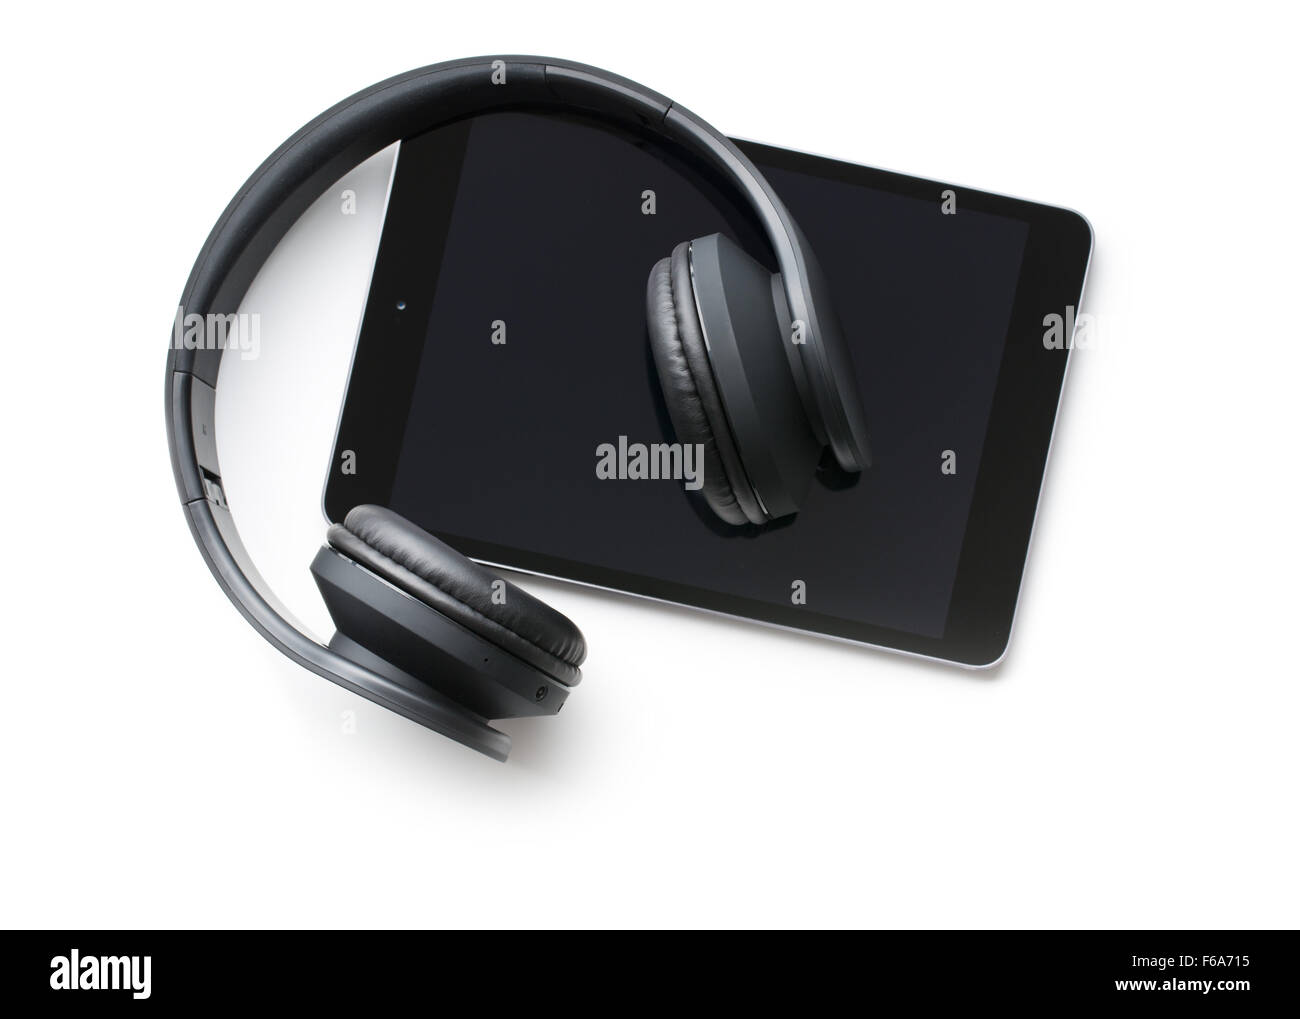 wireless headphones and computer tablet on white background Stock Photo